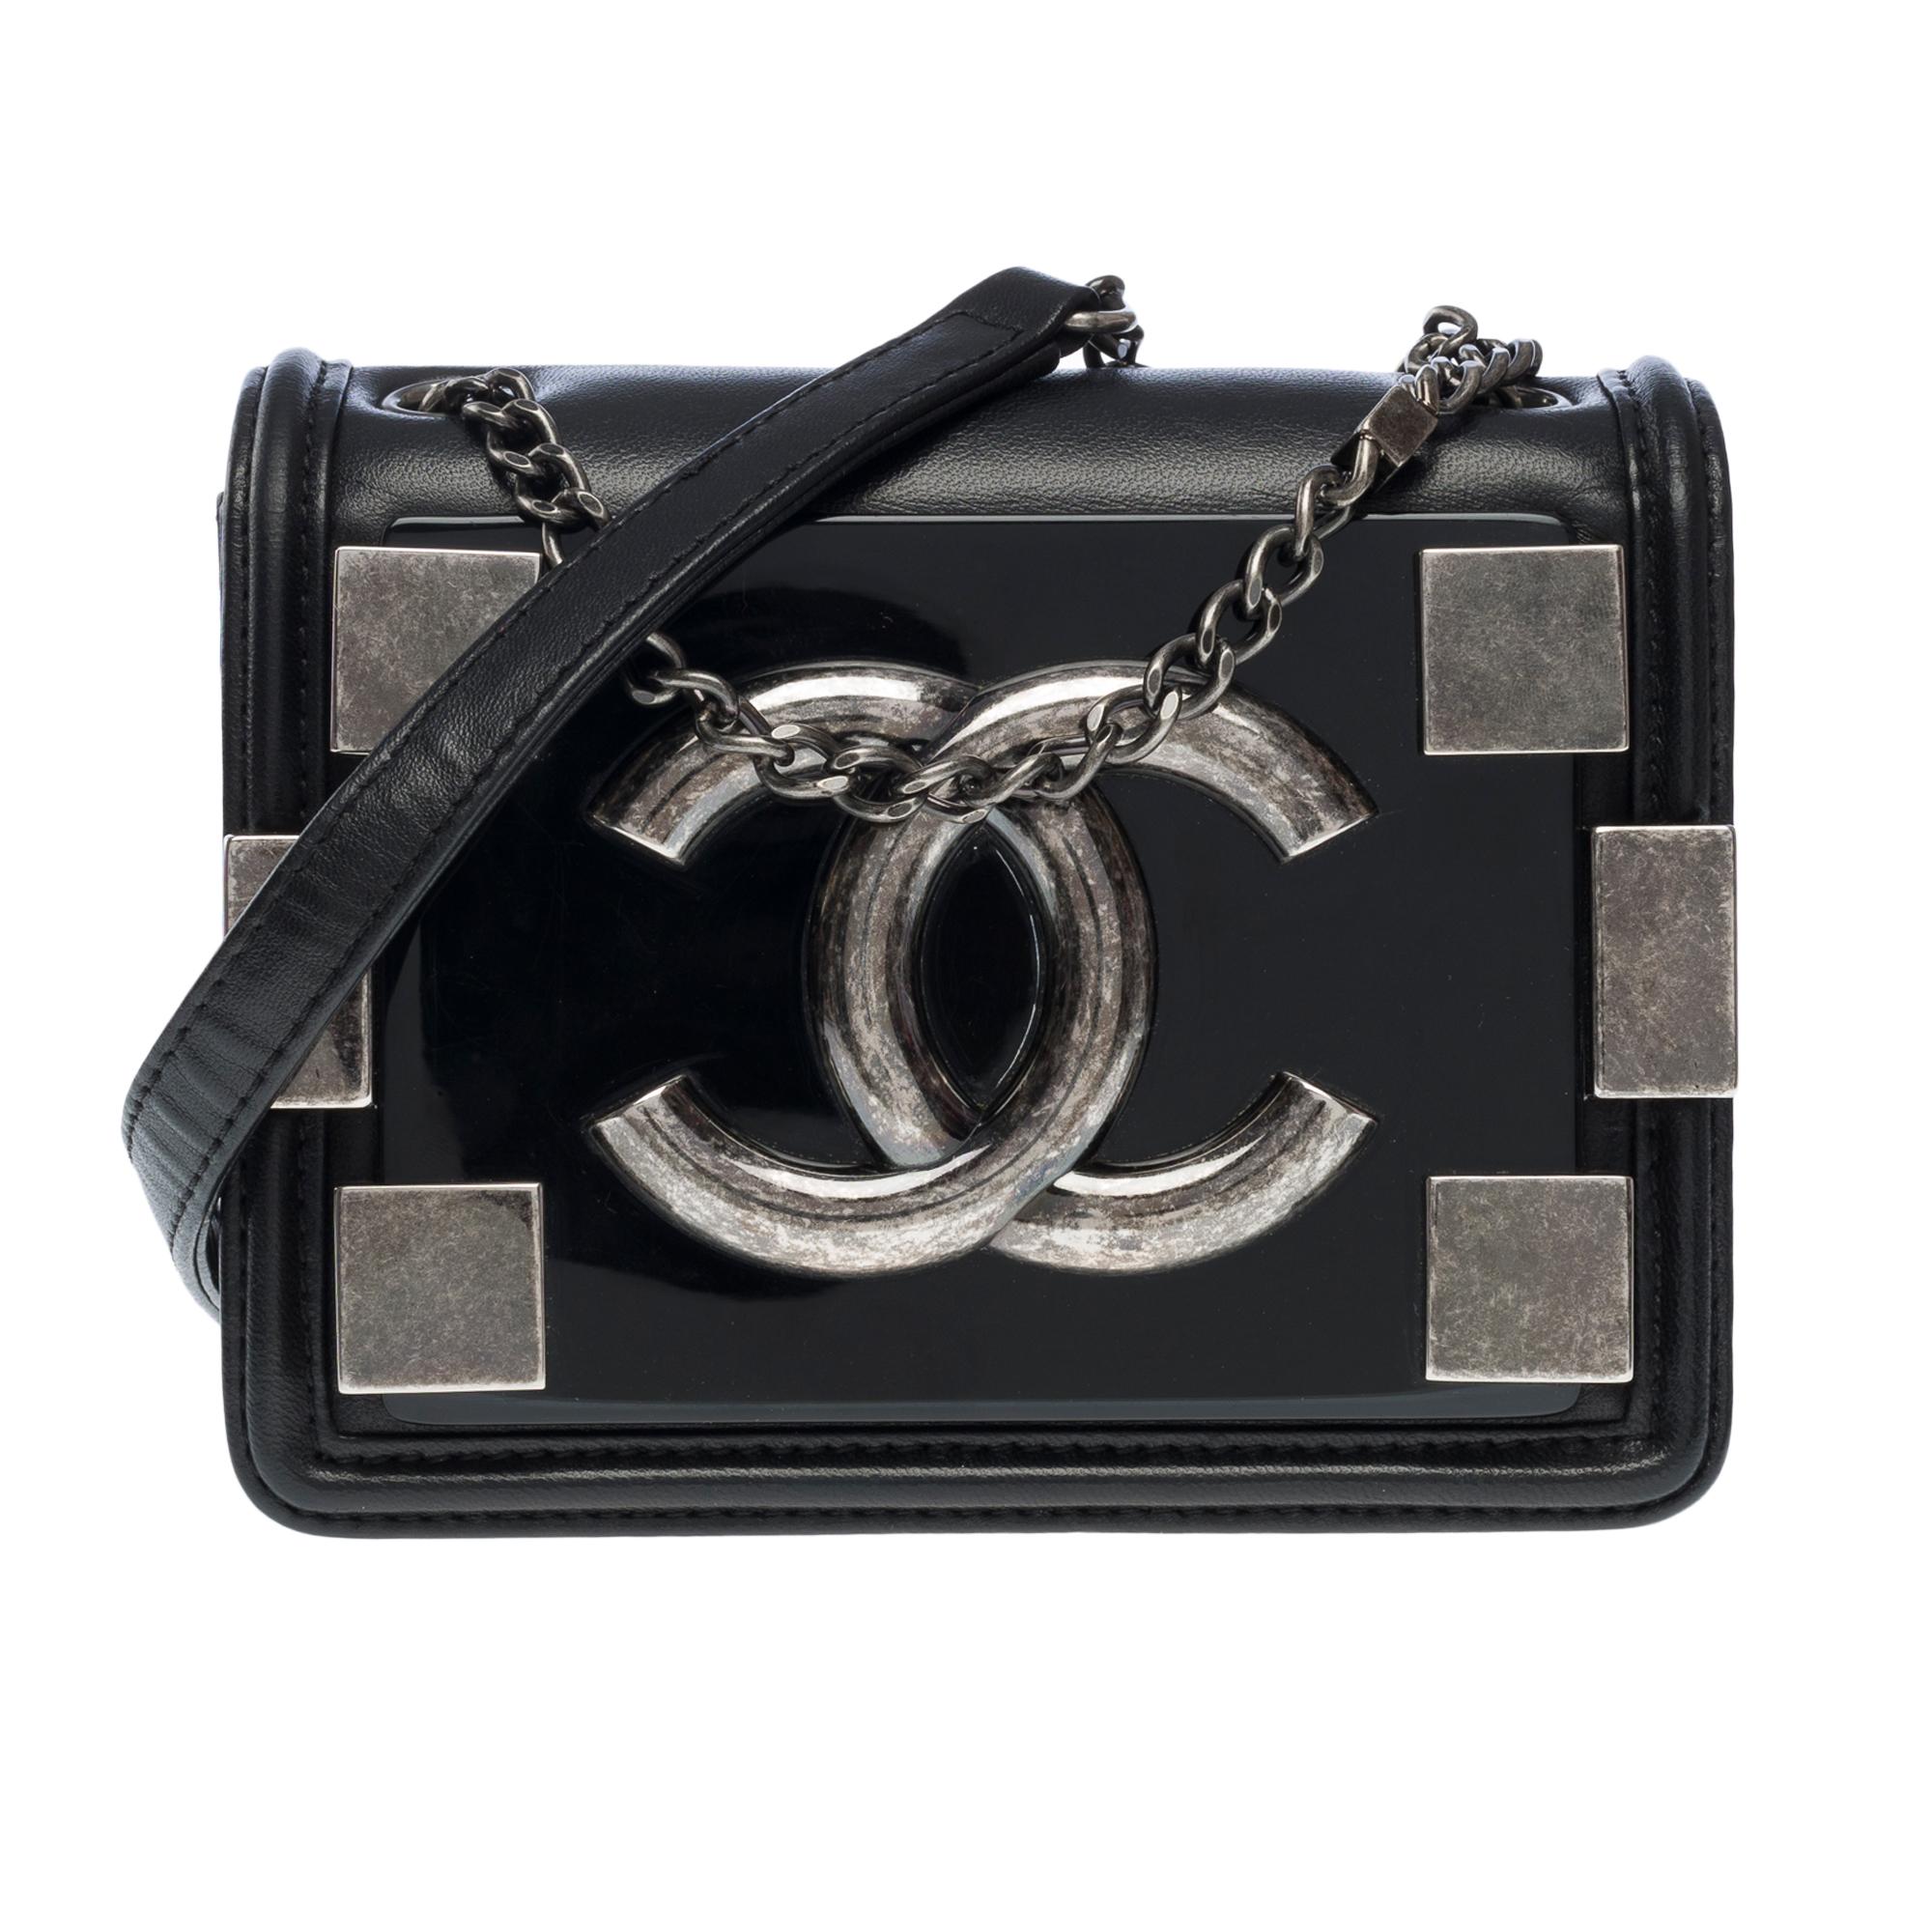 Exceptional​ ​&​ ​Rare​ ​limited​ ​edition​ ​Chanel​ ​mini​ ​lego​ ​brick​ ​shoulder​ ​flap​ ​bag​ ​with​ ​ruthenium​ ​plates​ ​on​ ​the​ ​front,​​ ​​shoulder​ ​strap​ ​in​ ​ruthenium​ ​metal​ ​for​ ​hand​ ​or​ ​crossbody​ ​carry

Magnetic​​